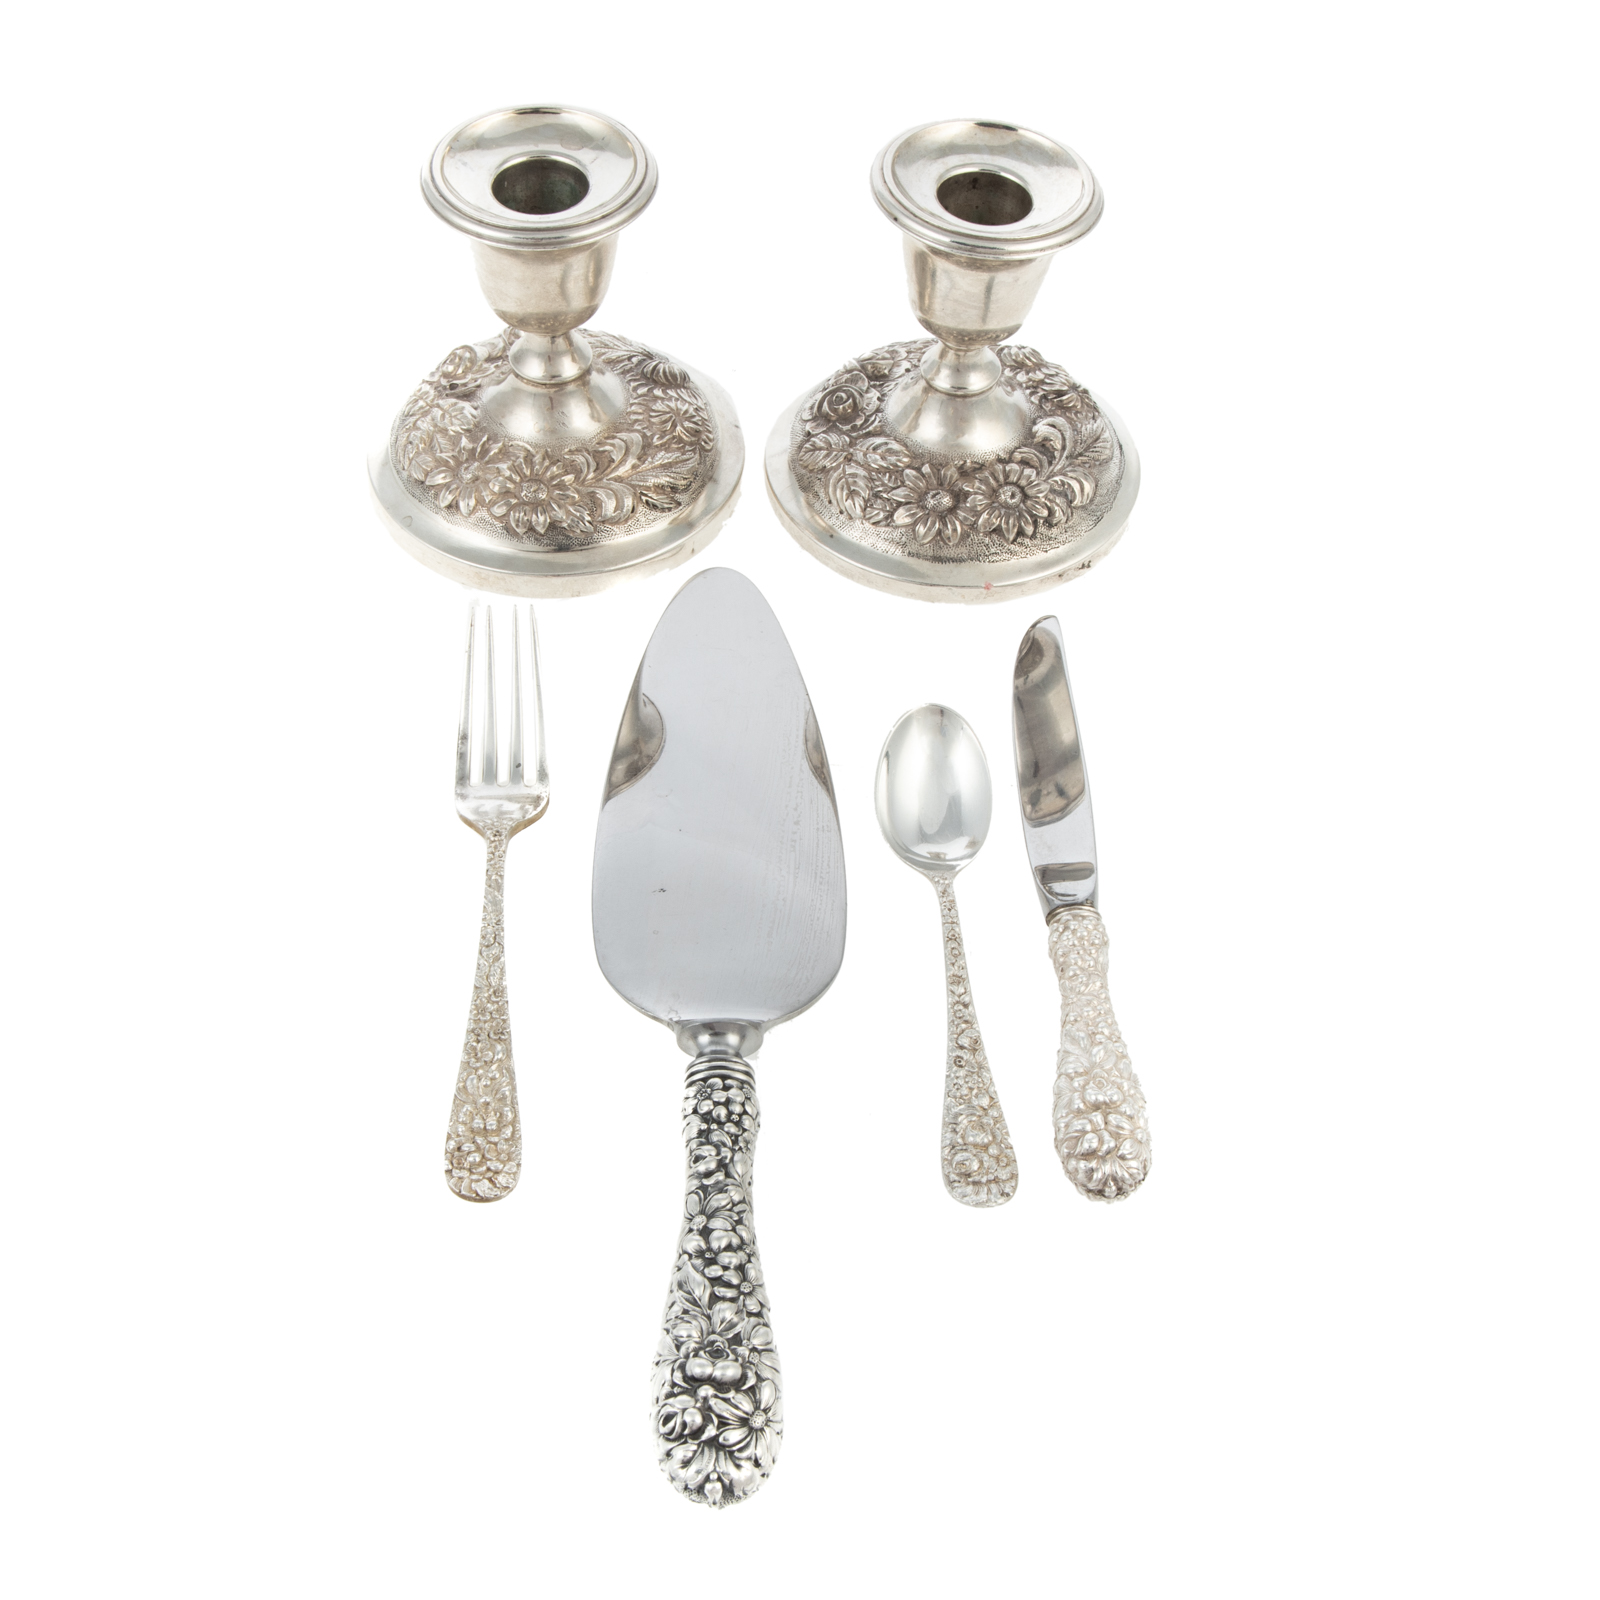 COLLECTION OF STIEFF STERLING SILVER